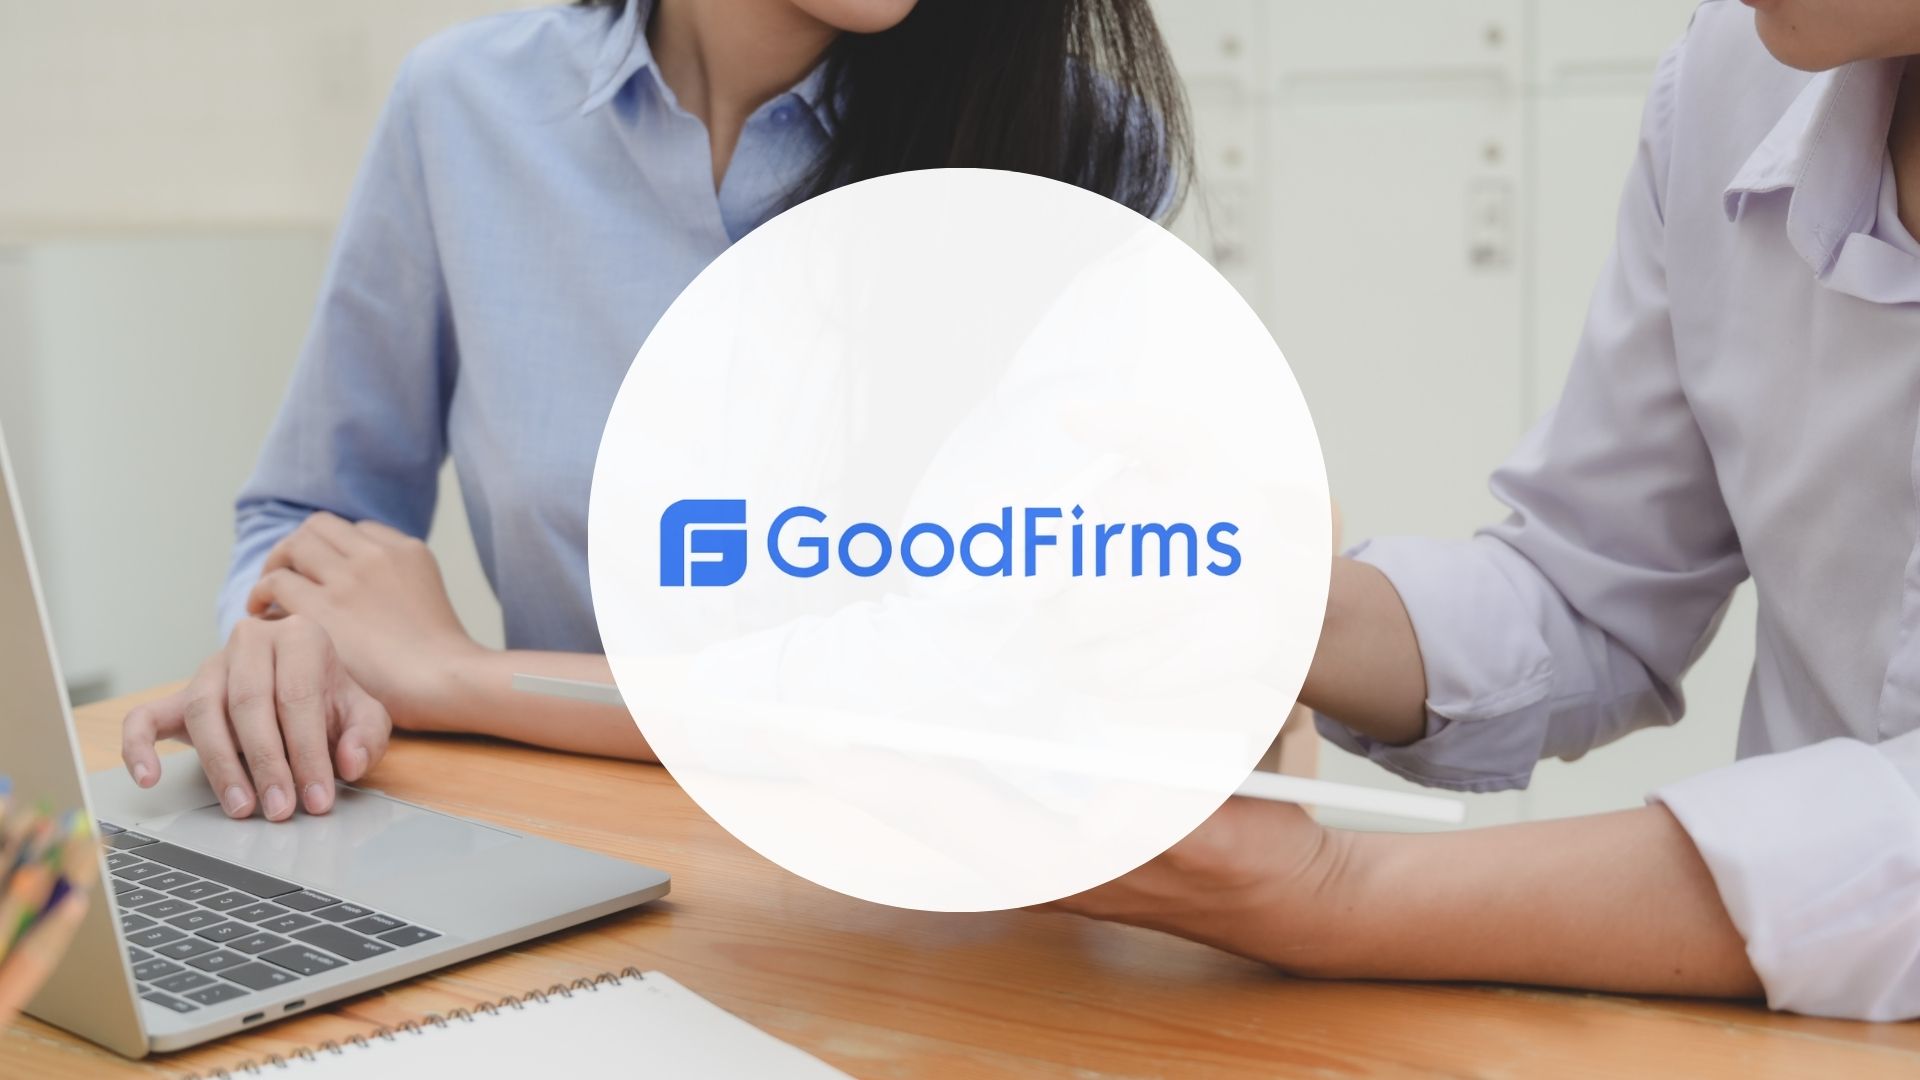 GoodFirms